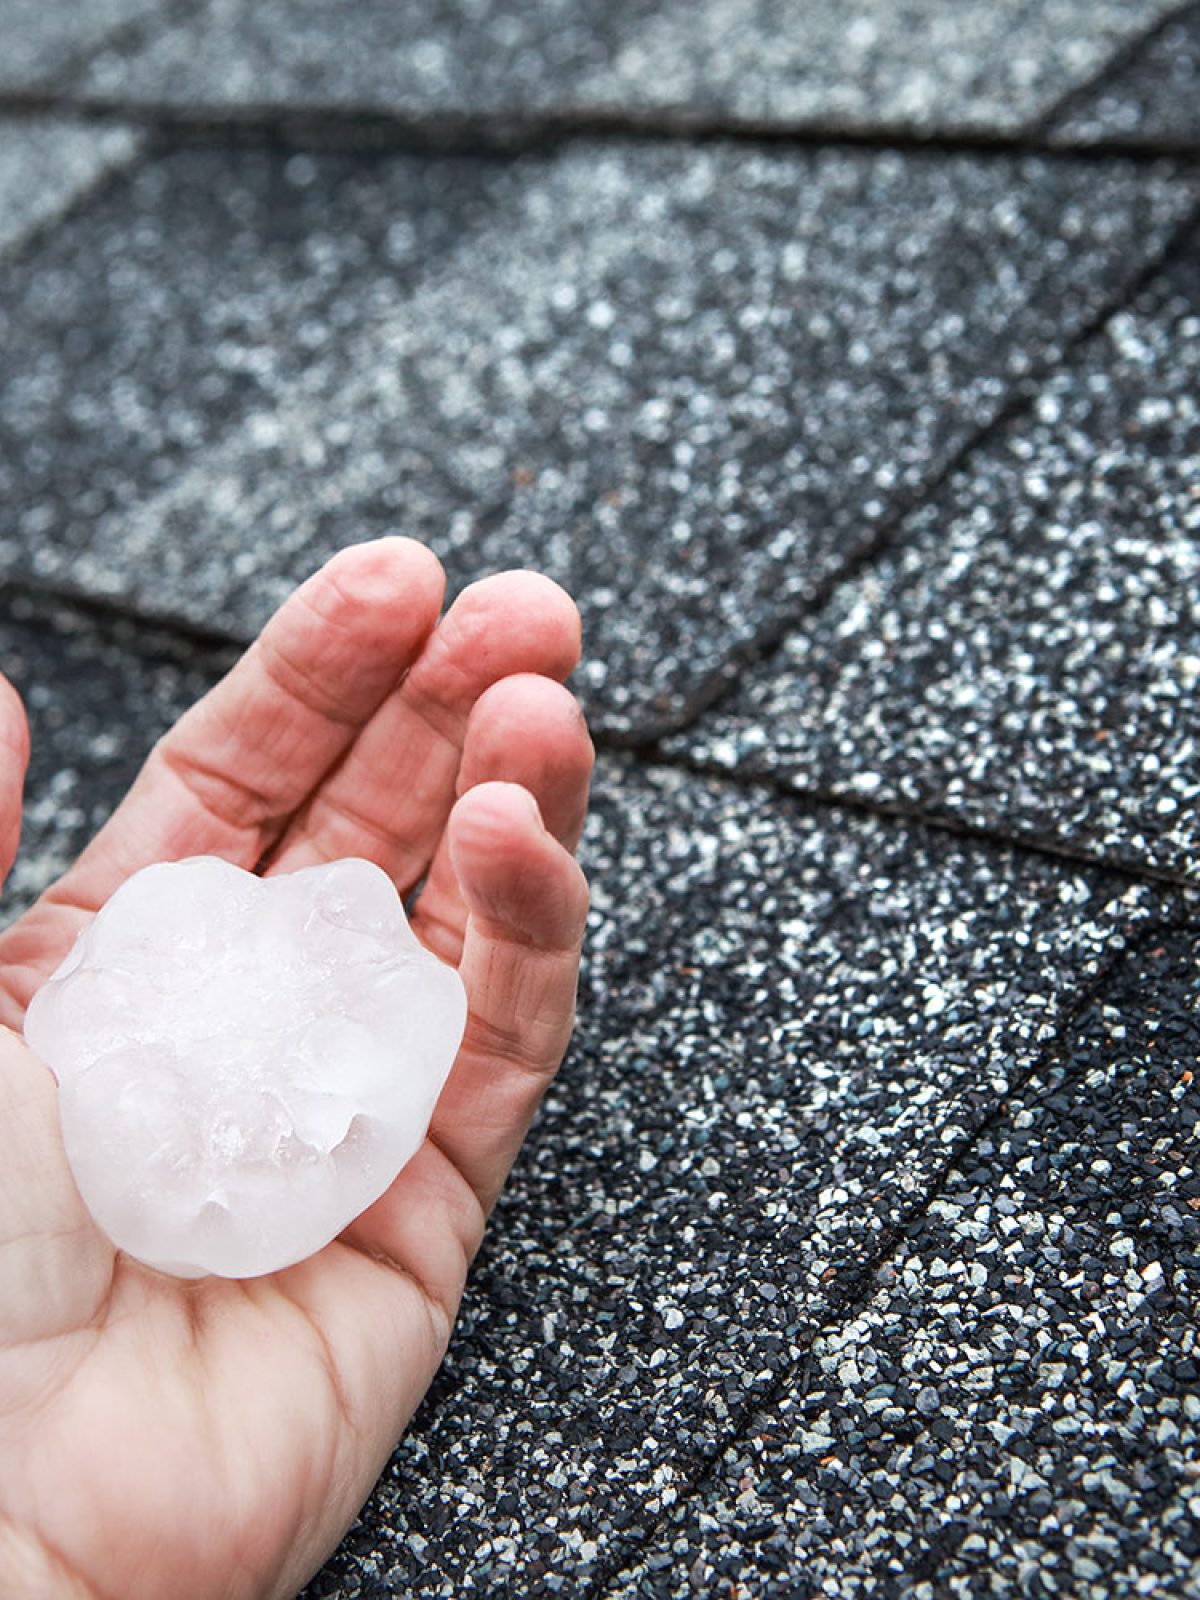 Hail in hand on a rooftop after hailstorm